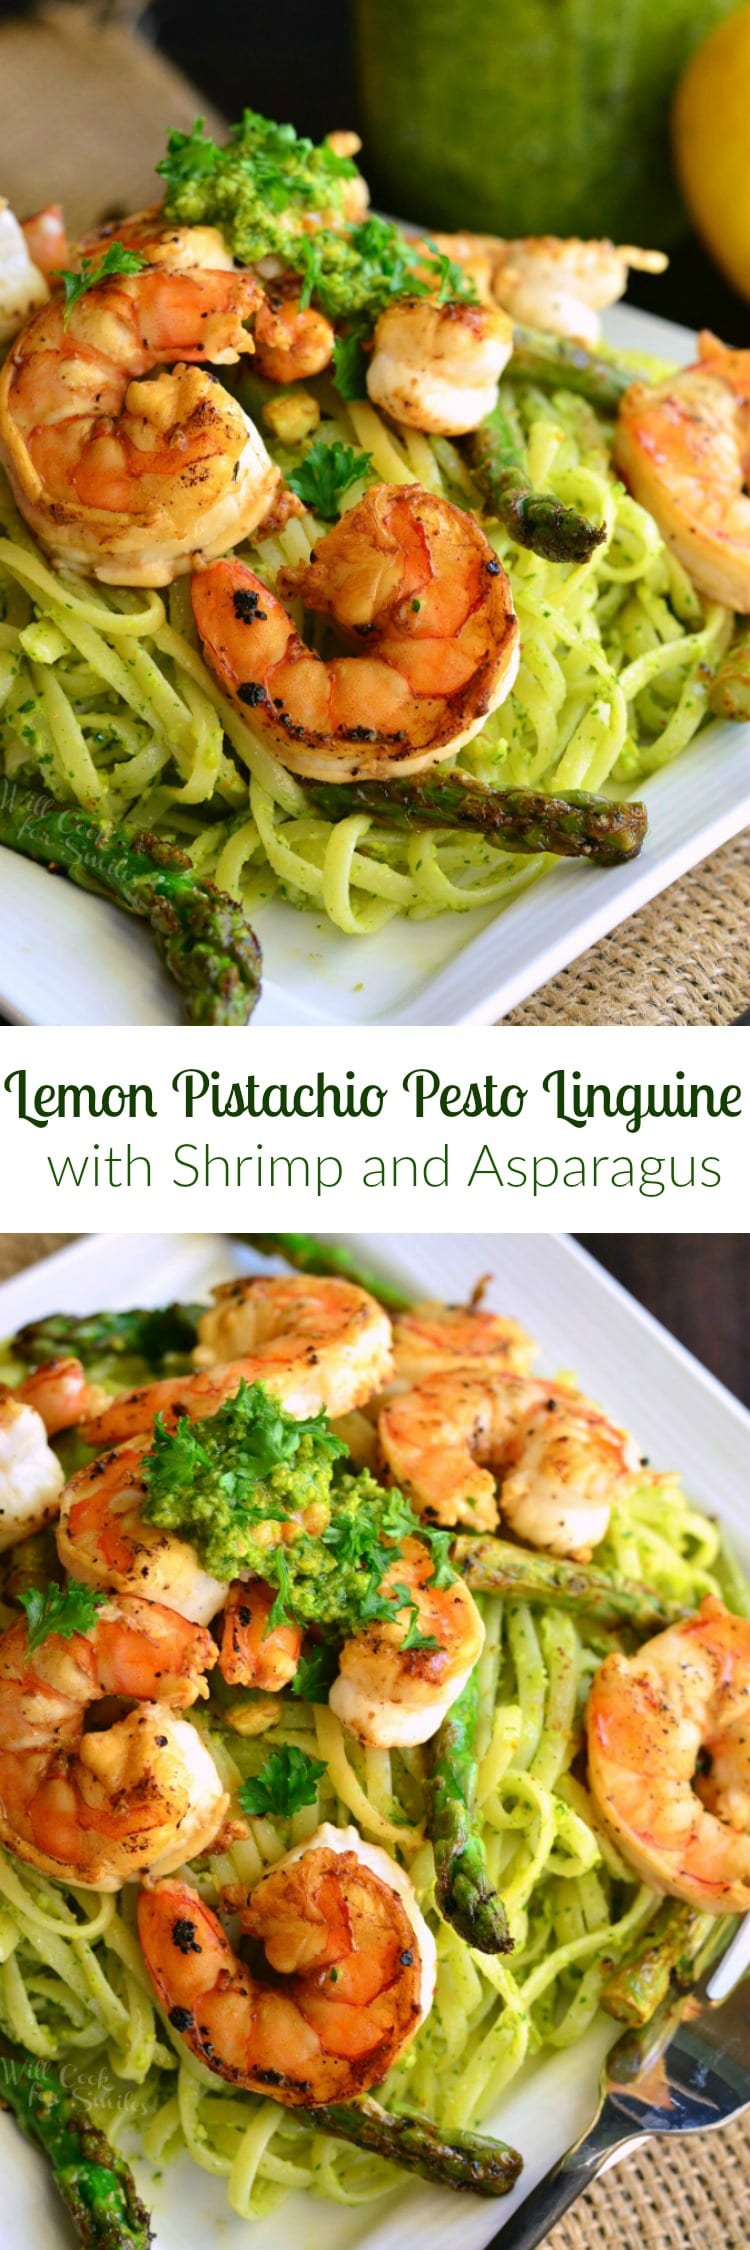 Photo collage with Lemon Pistachio Pesto Pasta with Shrimp and Asparagus on a white plate bottom photo top view Lemon Pistachio Pesto Pasta with Shrimp and Asparagus on a white plate 